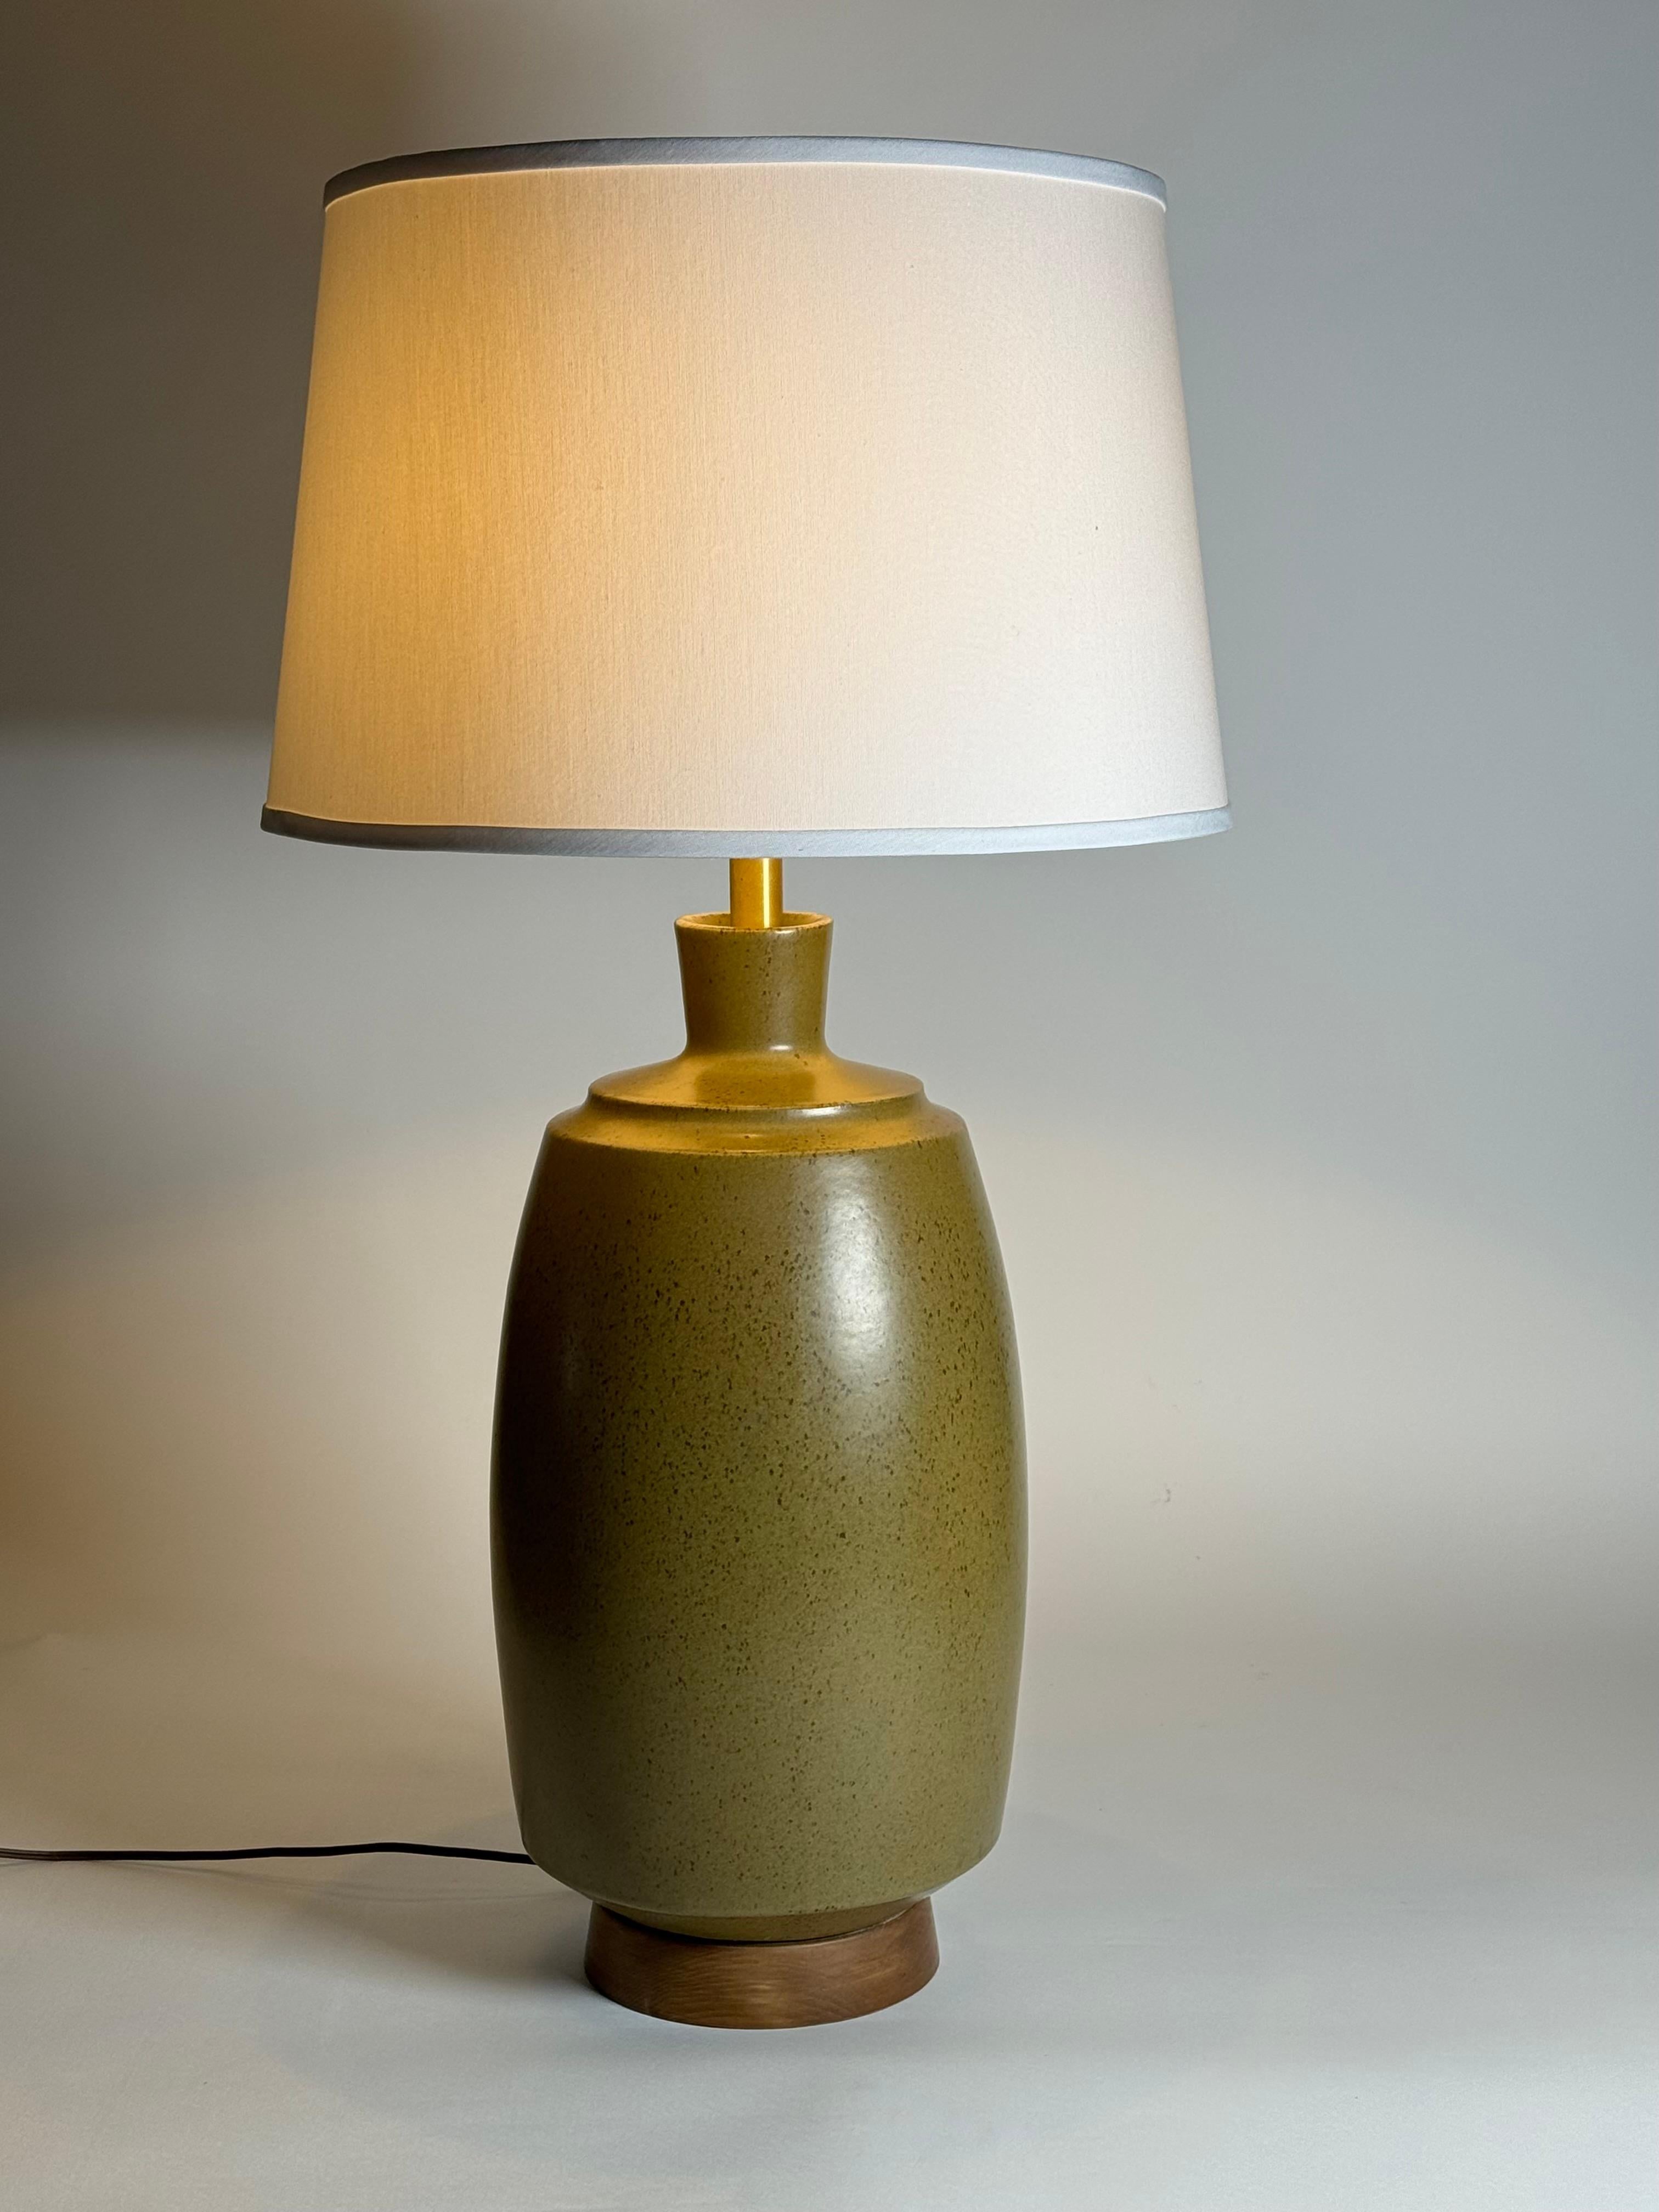 Ceramic table lamp by California ceramic artist David Cressey having a brown speckled glaze over an earth toned green under glaze. A tapered form with a step wedge top going into rounded cylinder body and ending in an angled in bottom resting on a